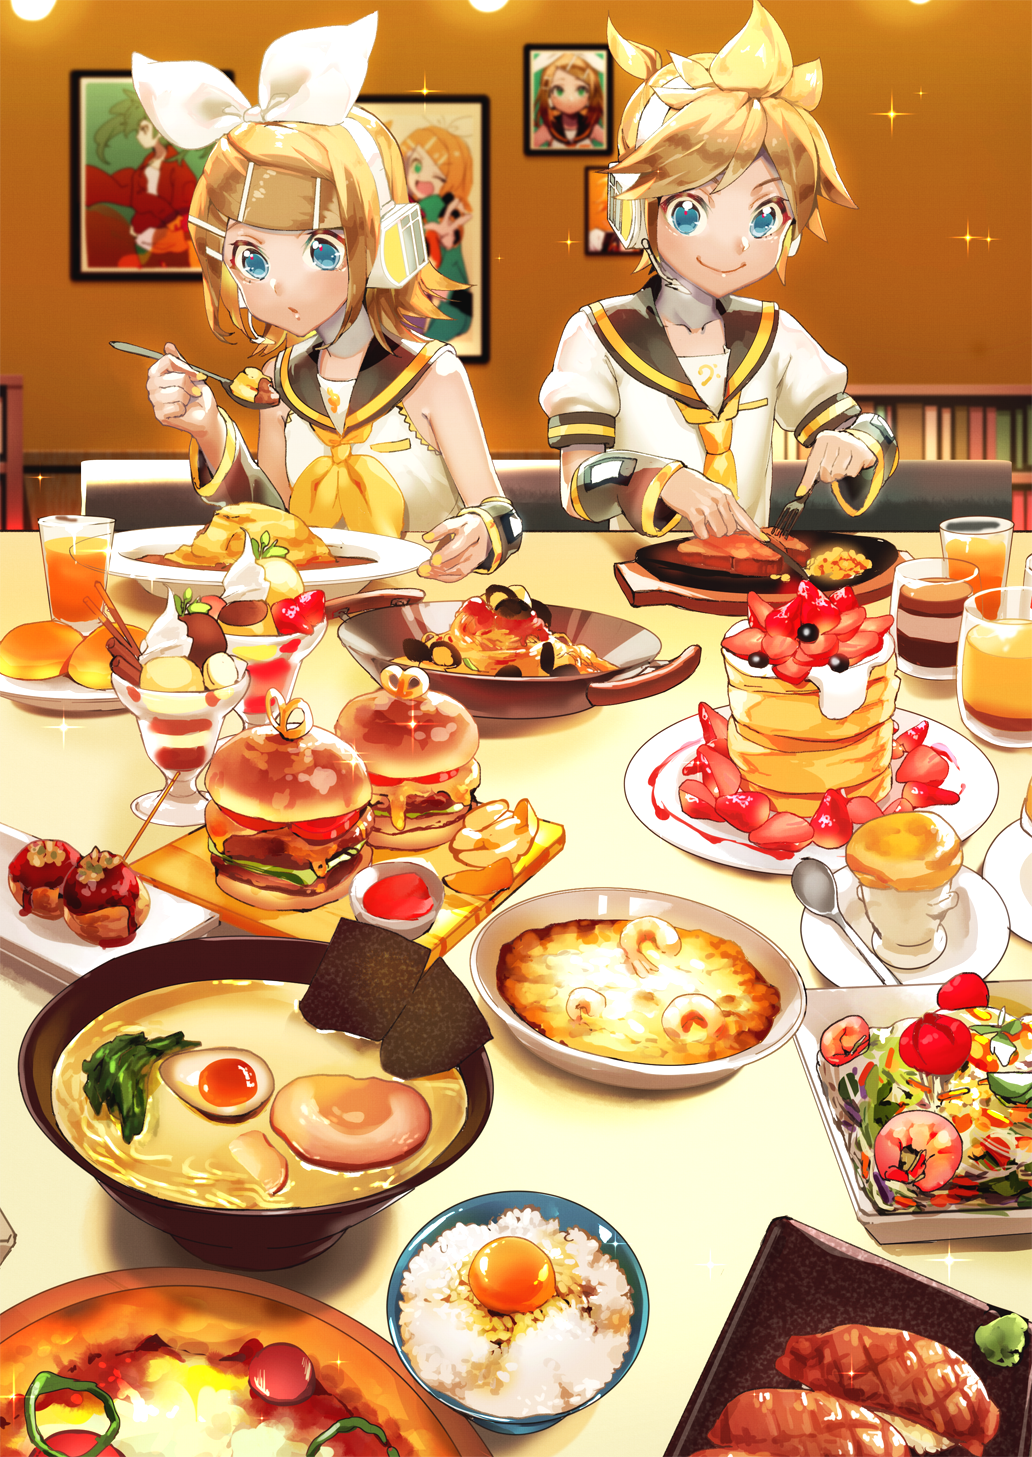 bangs bare_shoulders bass_clef blonde_hair blue_eyes bookshelf bow bowl cake clam commentary cream cup detached_sleeves drinking_glass eating egg egg_yolk food fork french_fries fruit green_hair hair_bow hair_ornament hairclip hamburger hatsune_miku headphones headset highres holding holding_fork holding_knife holding_spoon ice_cream kagamine_len kagamine_rin knife meat neck_ribbon necktie nigirizushi noodles nori_(seaweed) pasta photo_(object) plate pudding puffy_short_sleeves puffy_sleeves ramen ribbon rice sailor_collar saucer sawashi_(ur-sawasi) short_hair short_sleeves shrimp smile souffle_(food) soup spaghetti sparkle spiked_hair spoon steak strawberry suna_no_wakusei_(vocaloid) sundae sushi takoyaki tomato treble_clef vocaloid wafer_stick wasabi white_bow yellow_neckwear